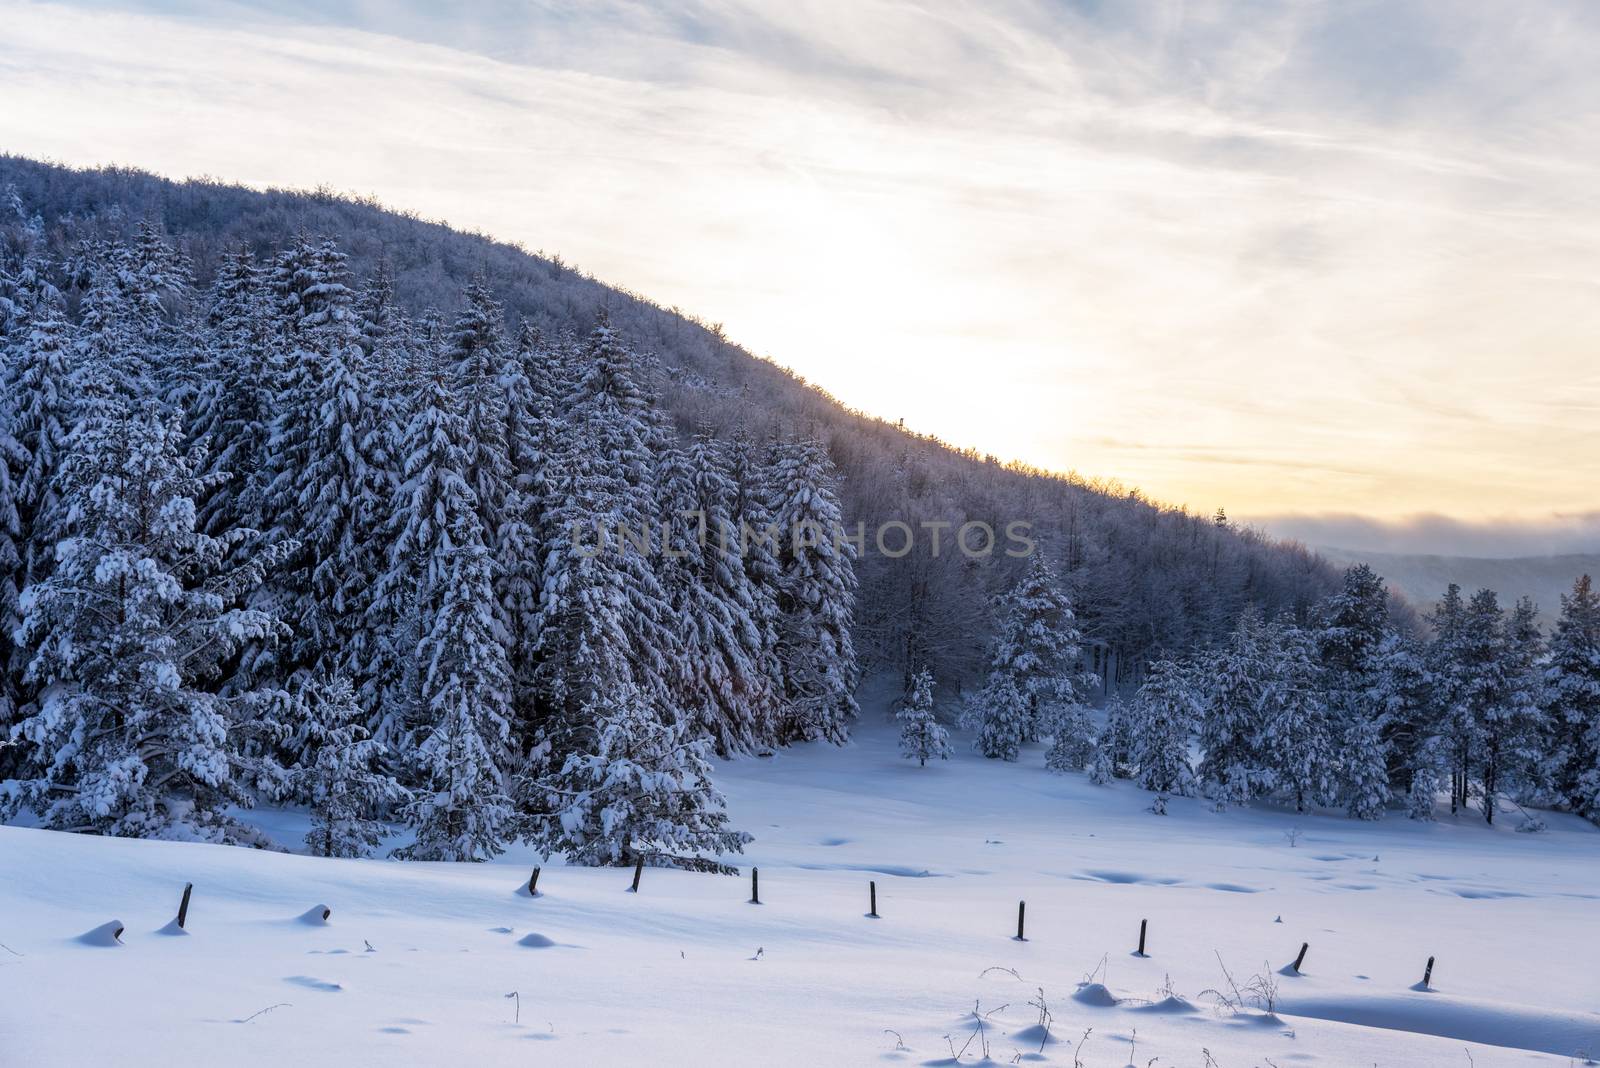 Snowy landscape at sunset, frozen trees in winter in Bulgaria.